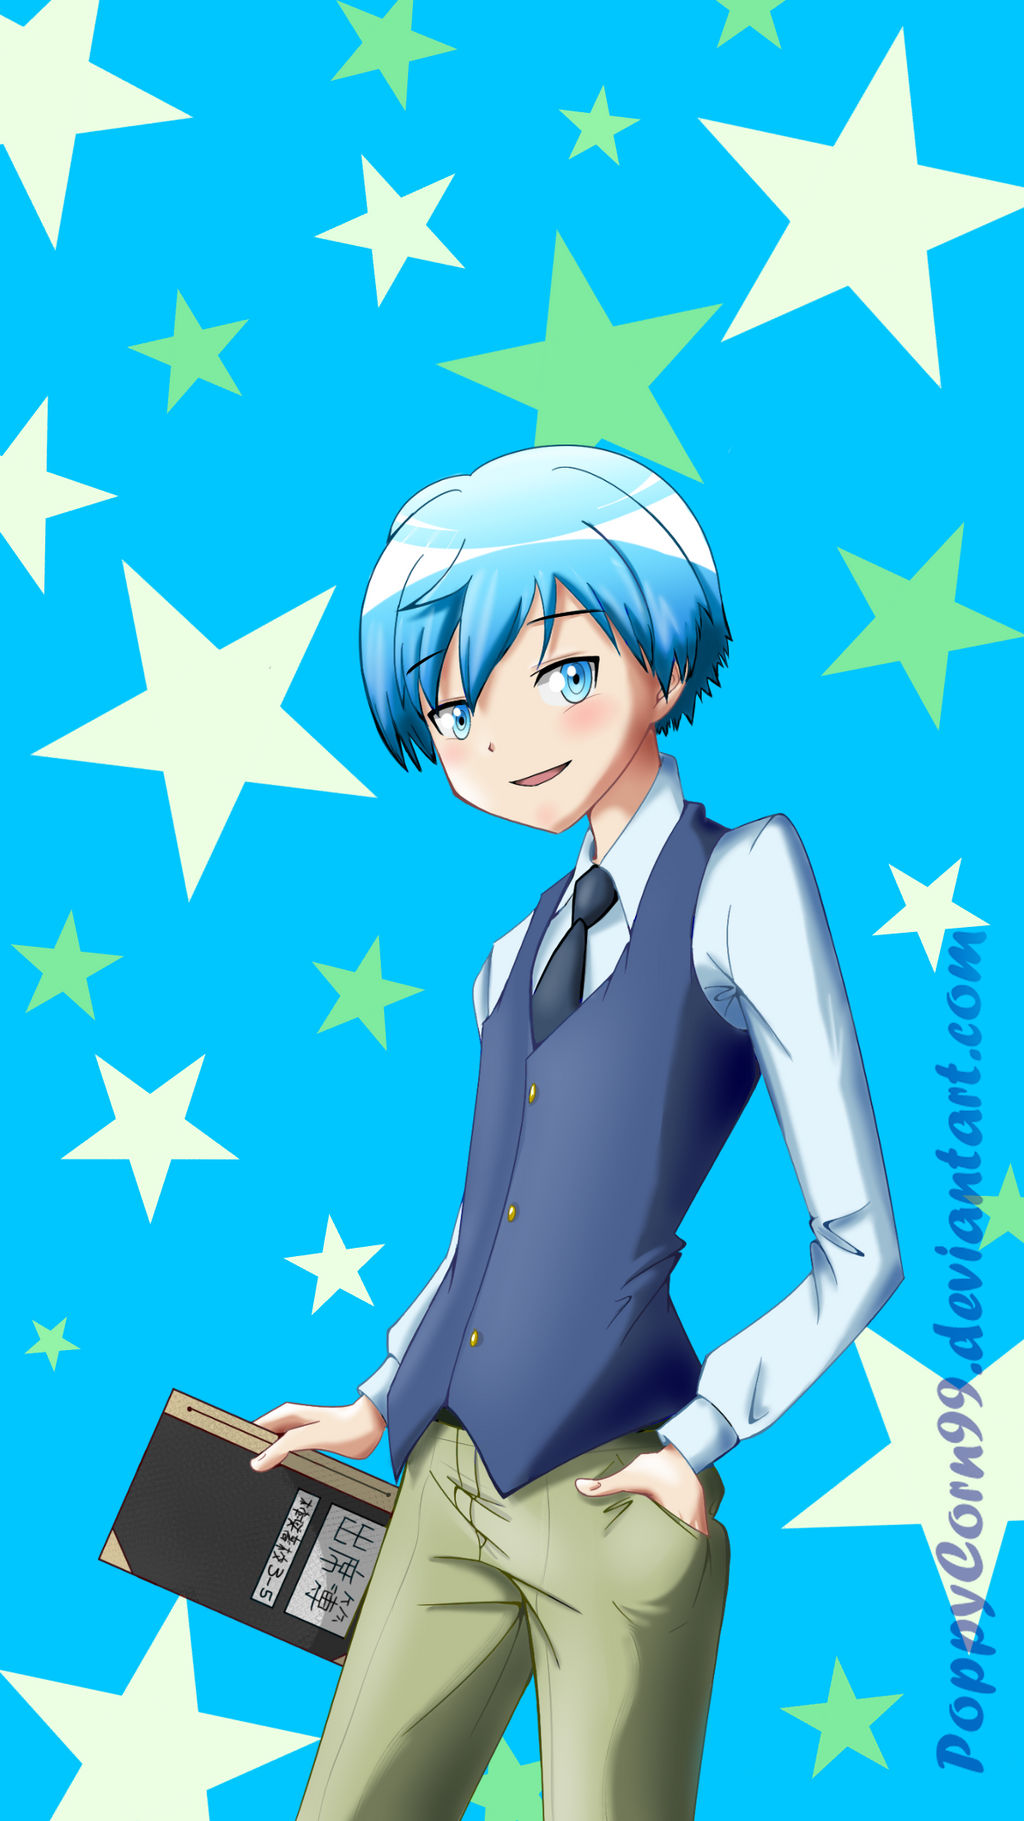 Discover the World of Nagisa from Assassination Classroom